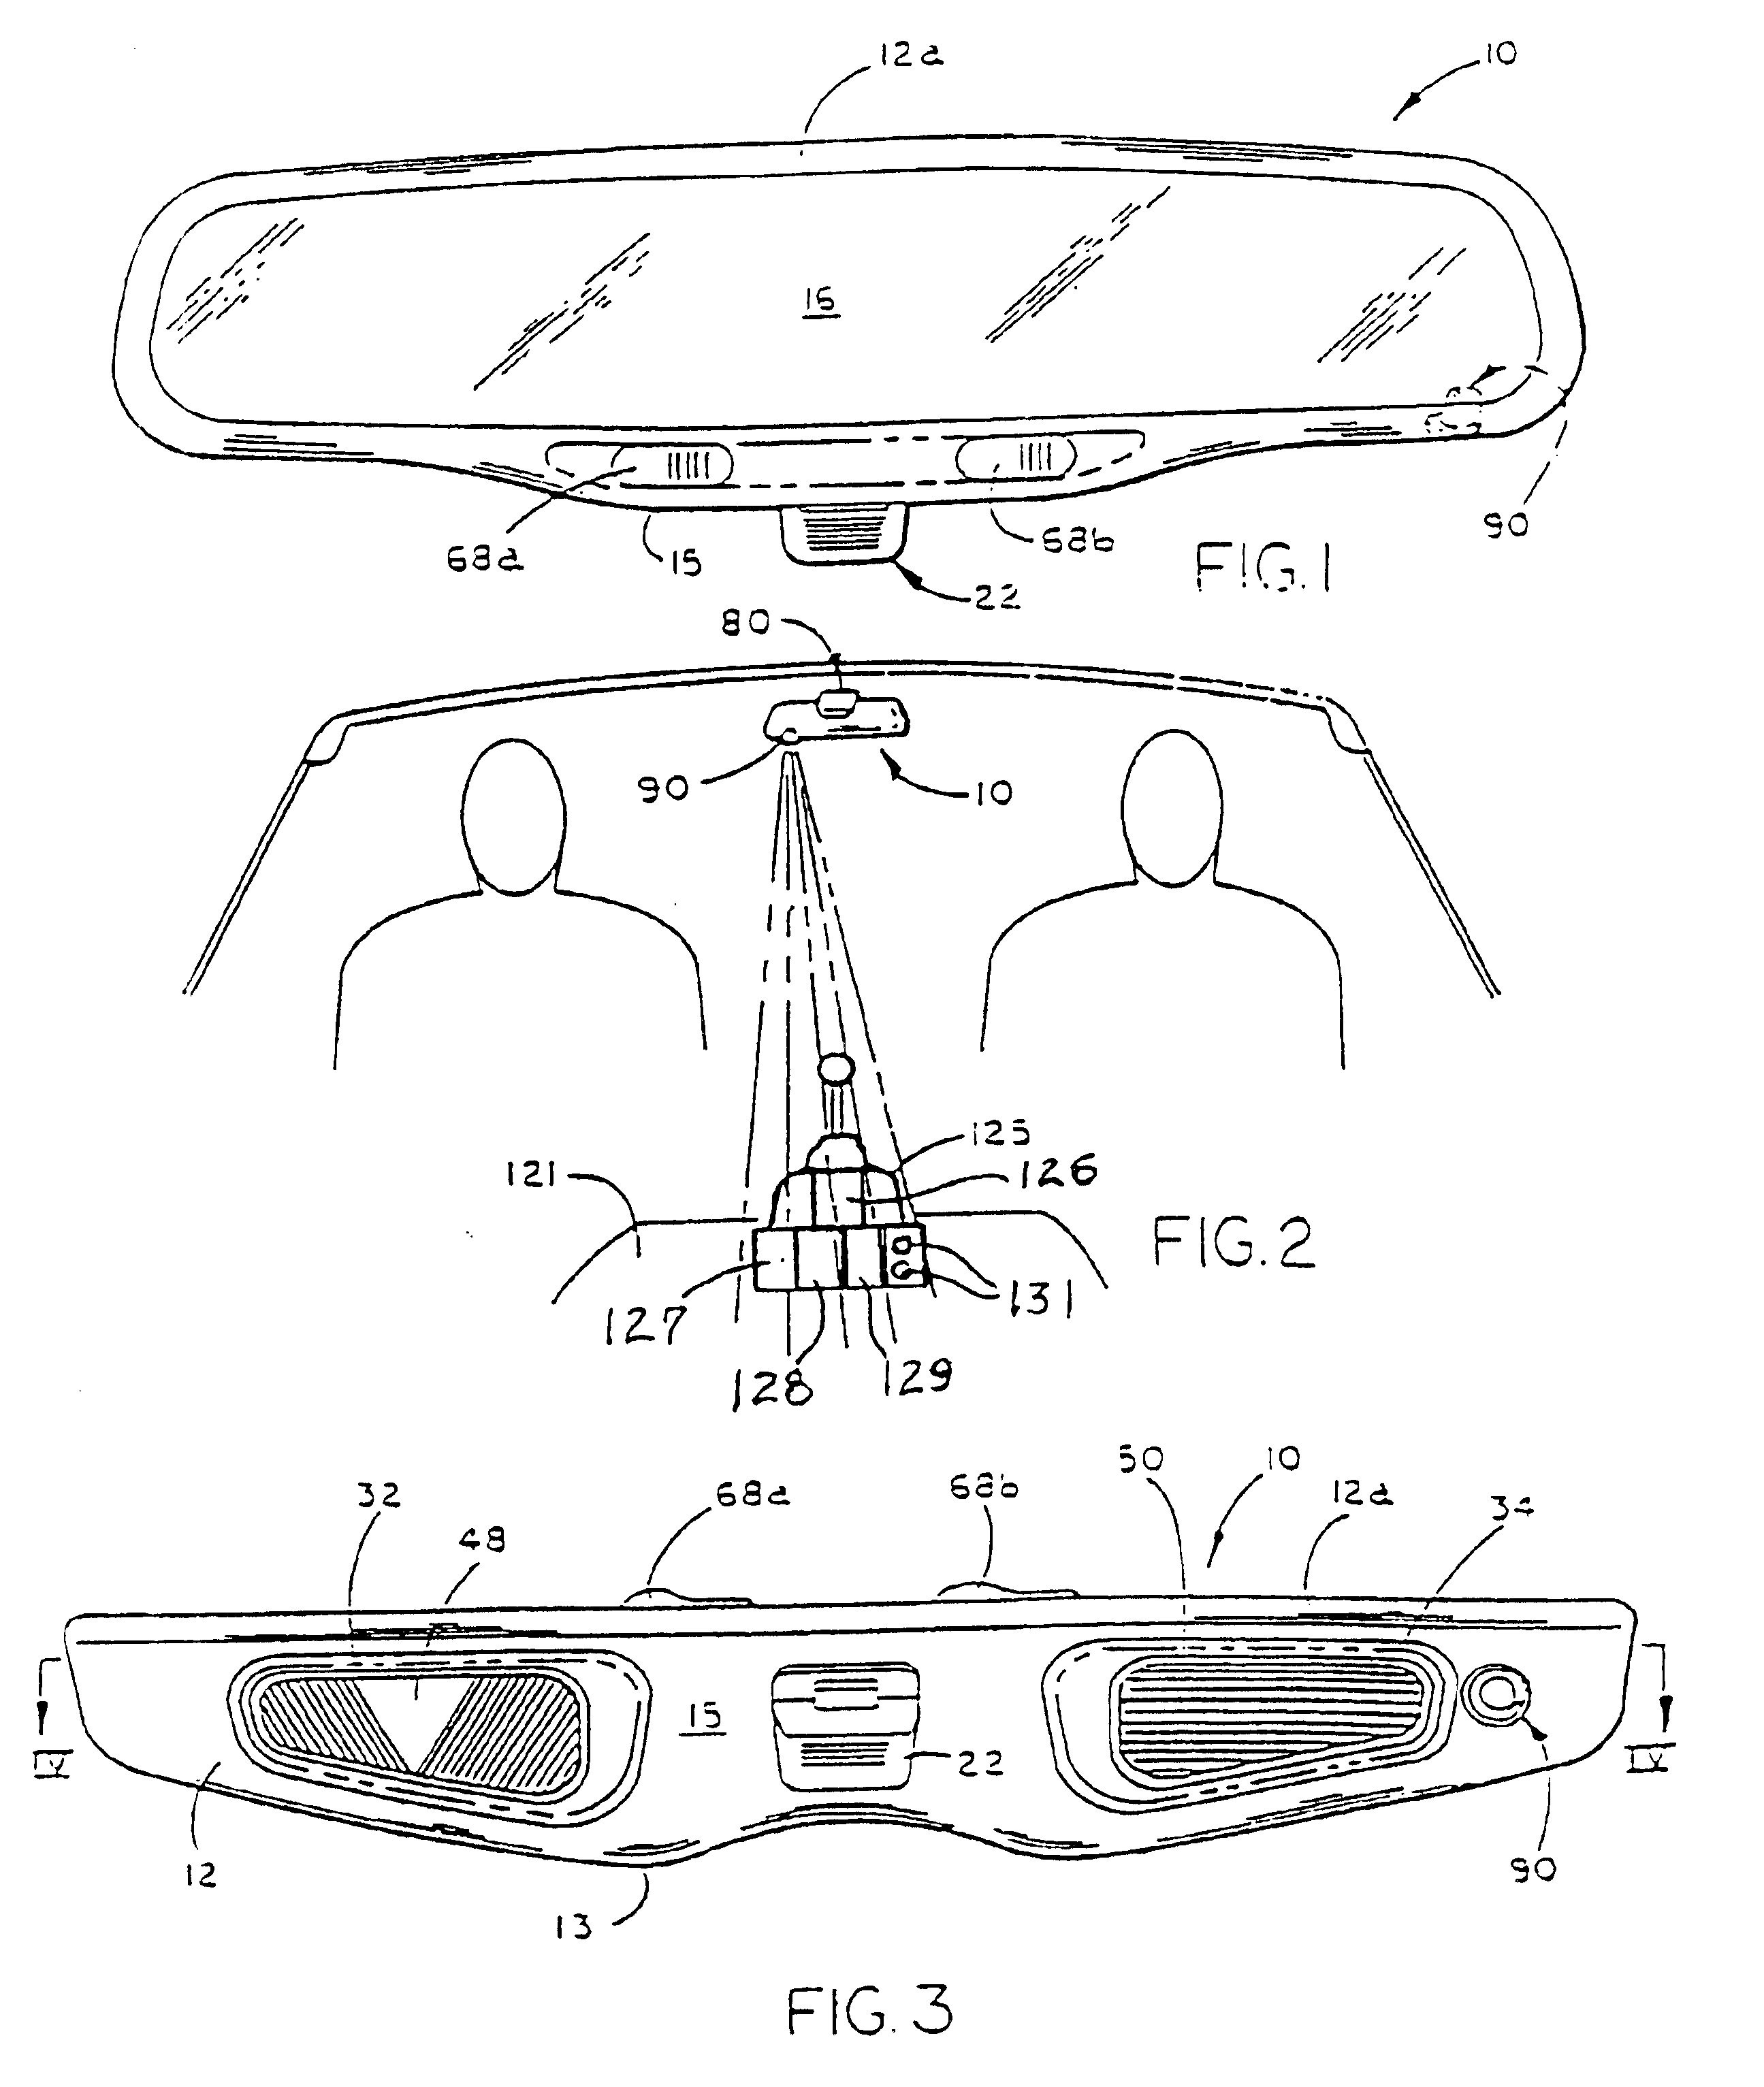 Interior mirror assembly for a vehicle incorporating a solid-state light source